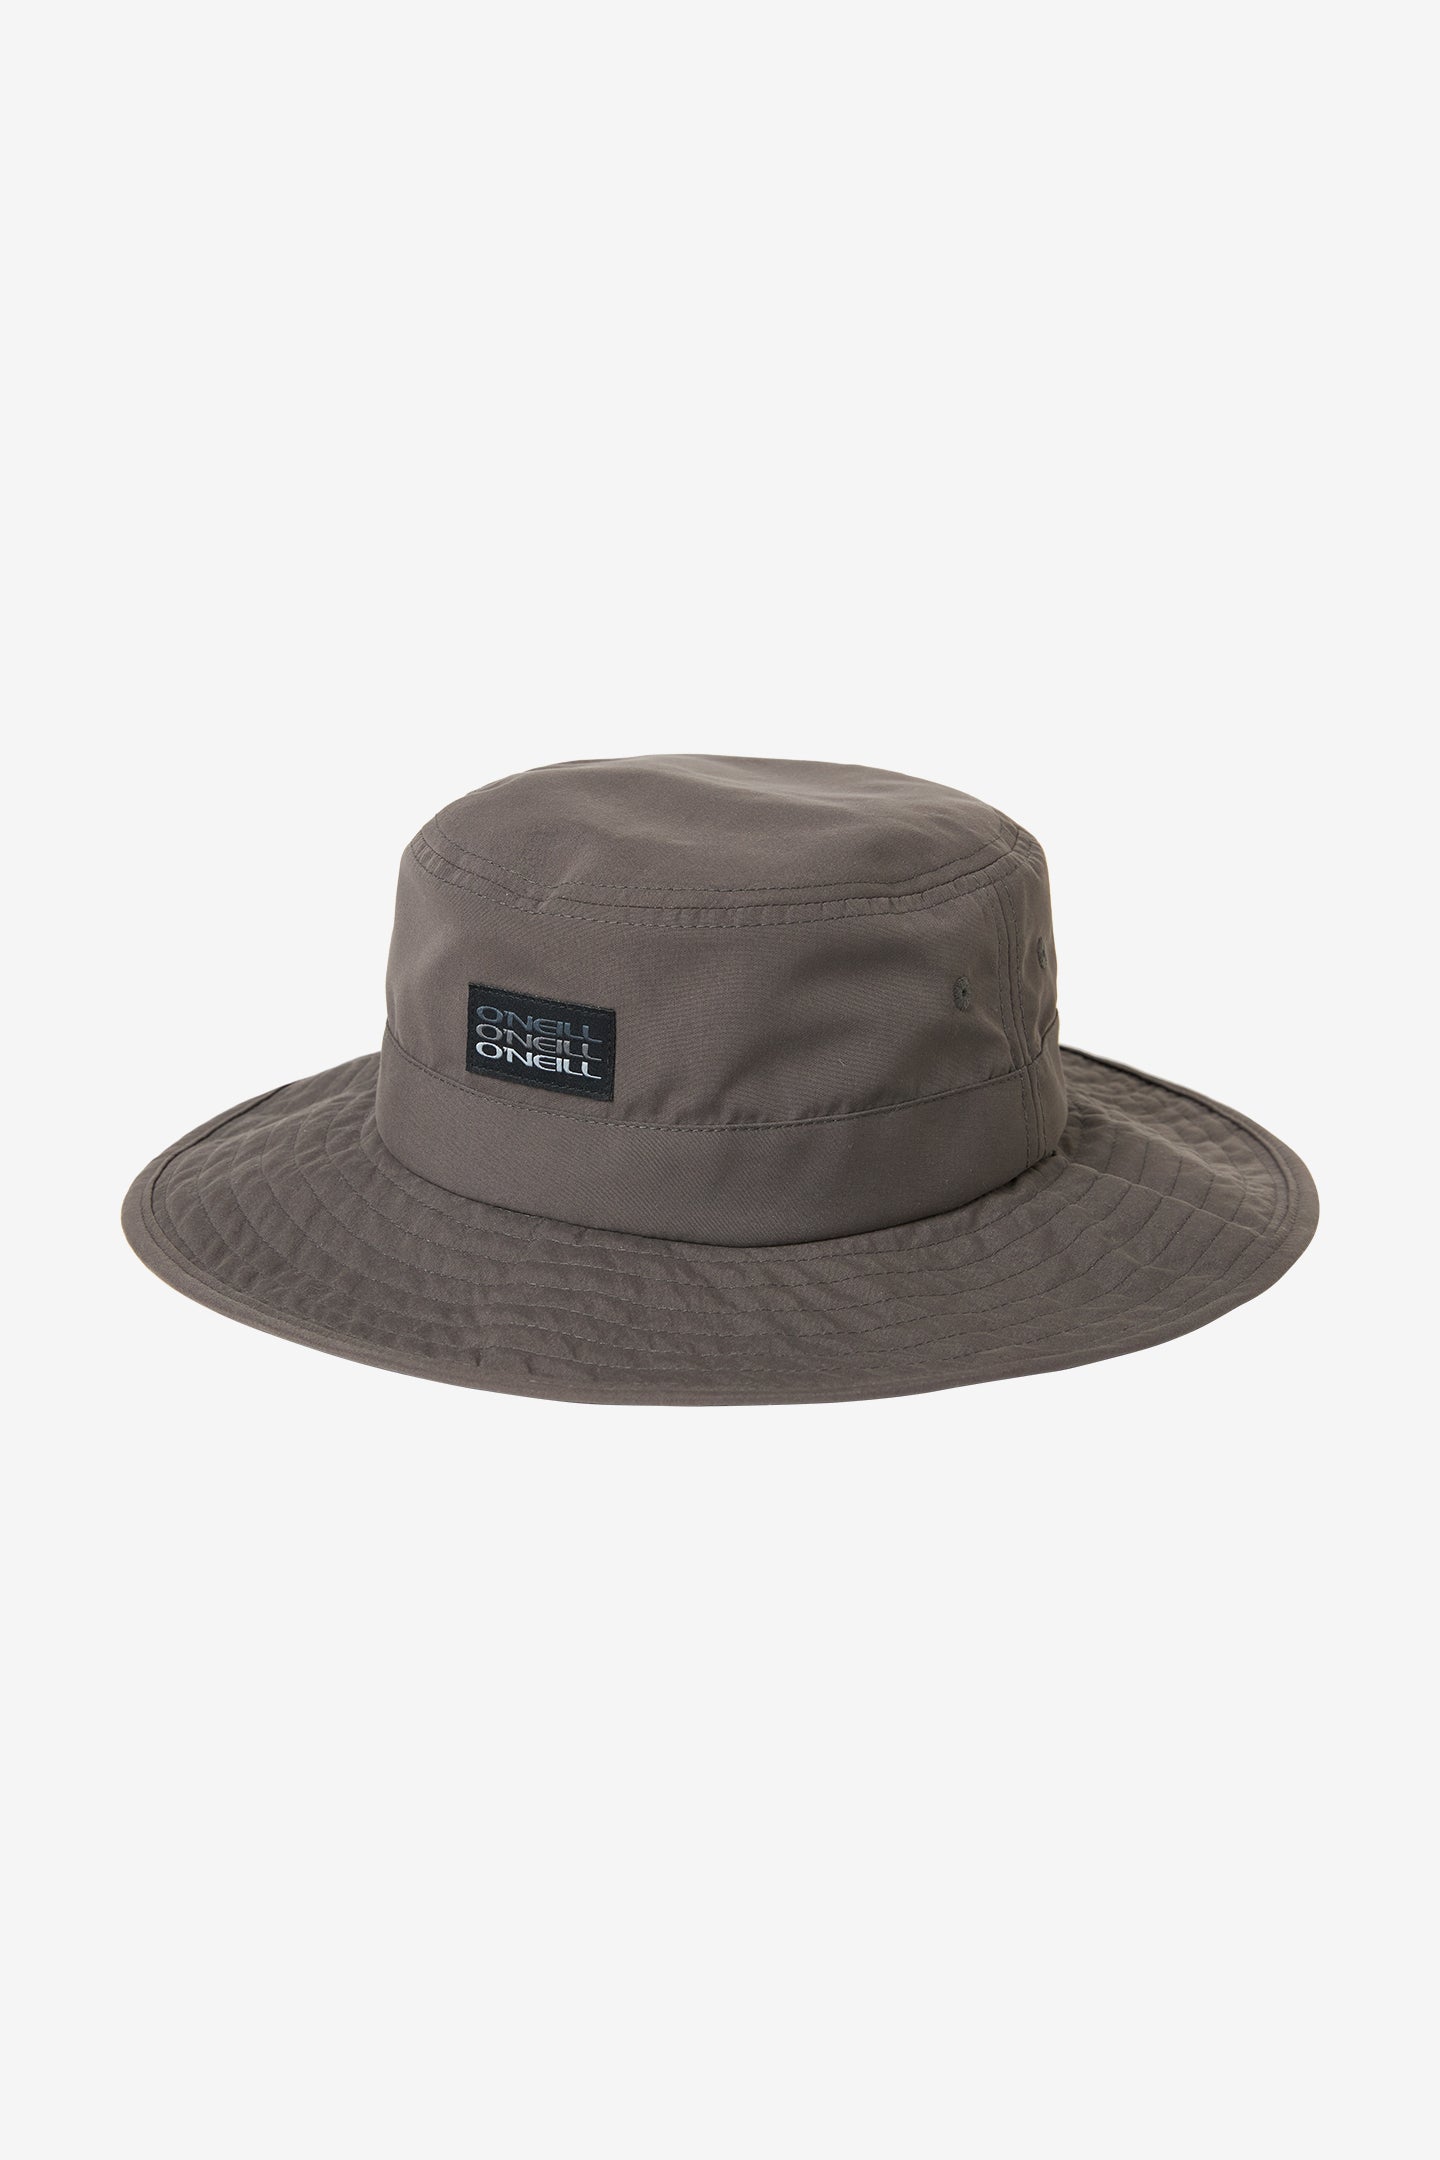 O'Neill Wetlands Hat for Men - Graphite / One Size